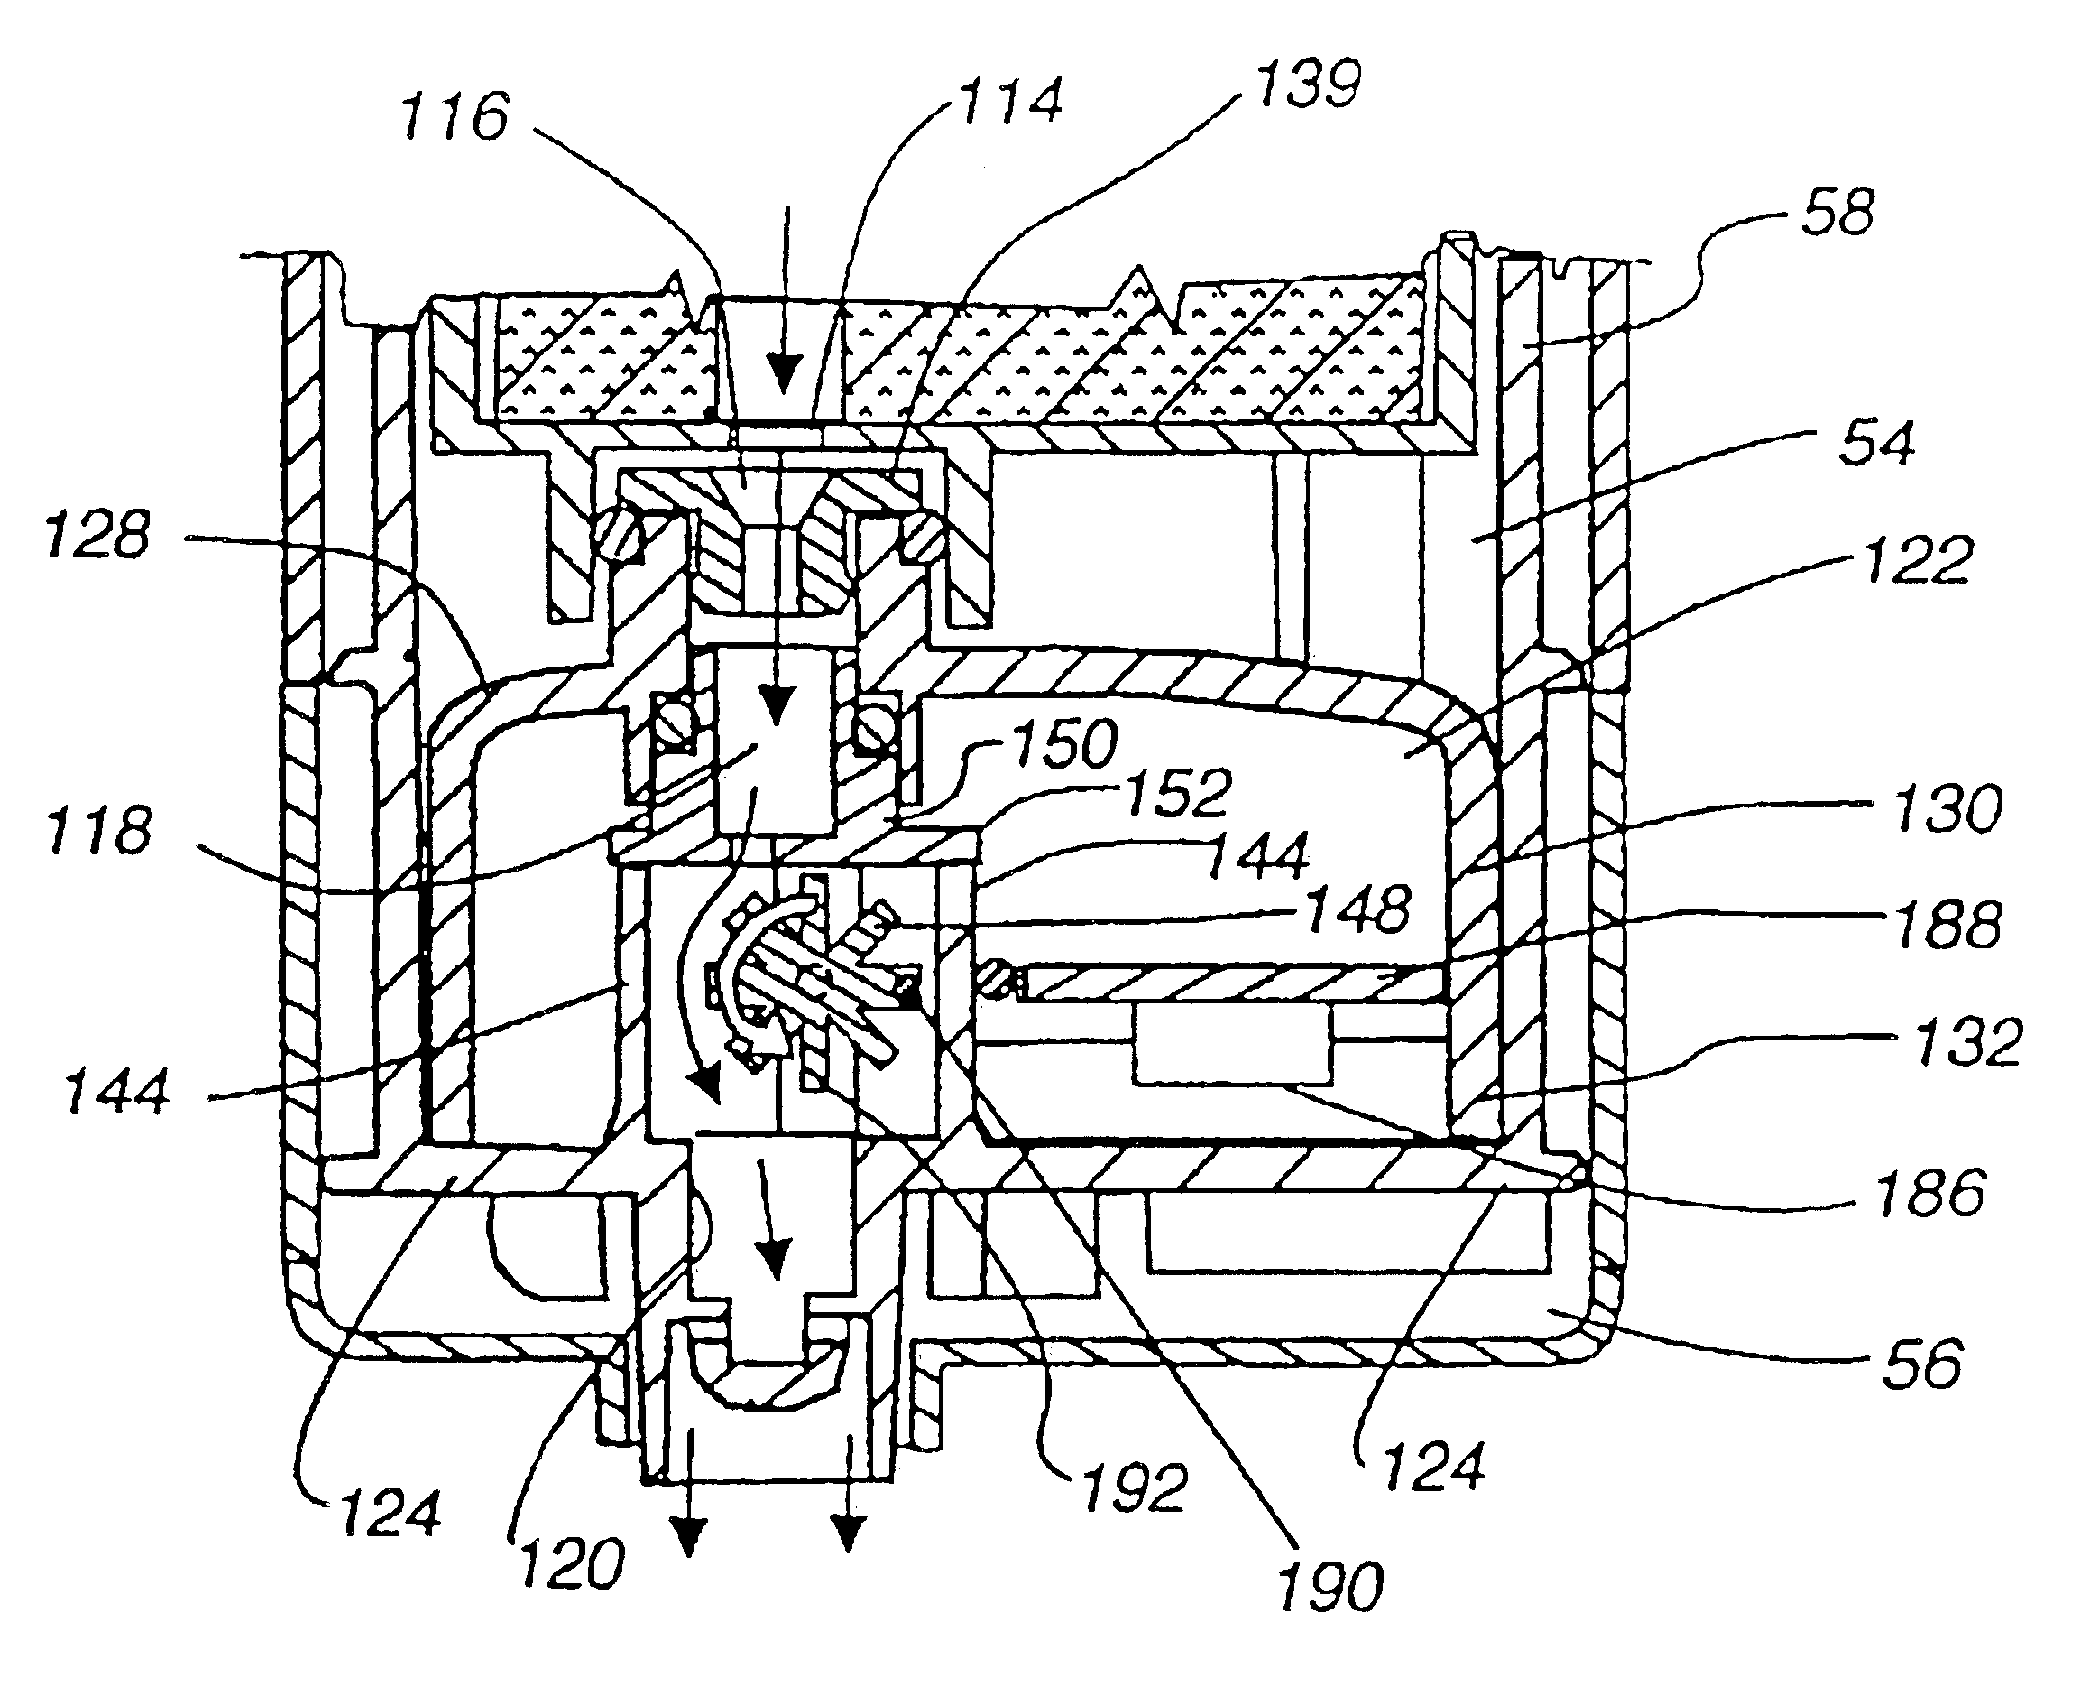 Water treatment device with volumetric and time monitoring features